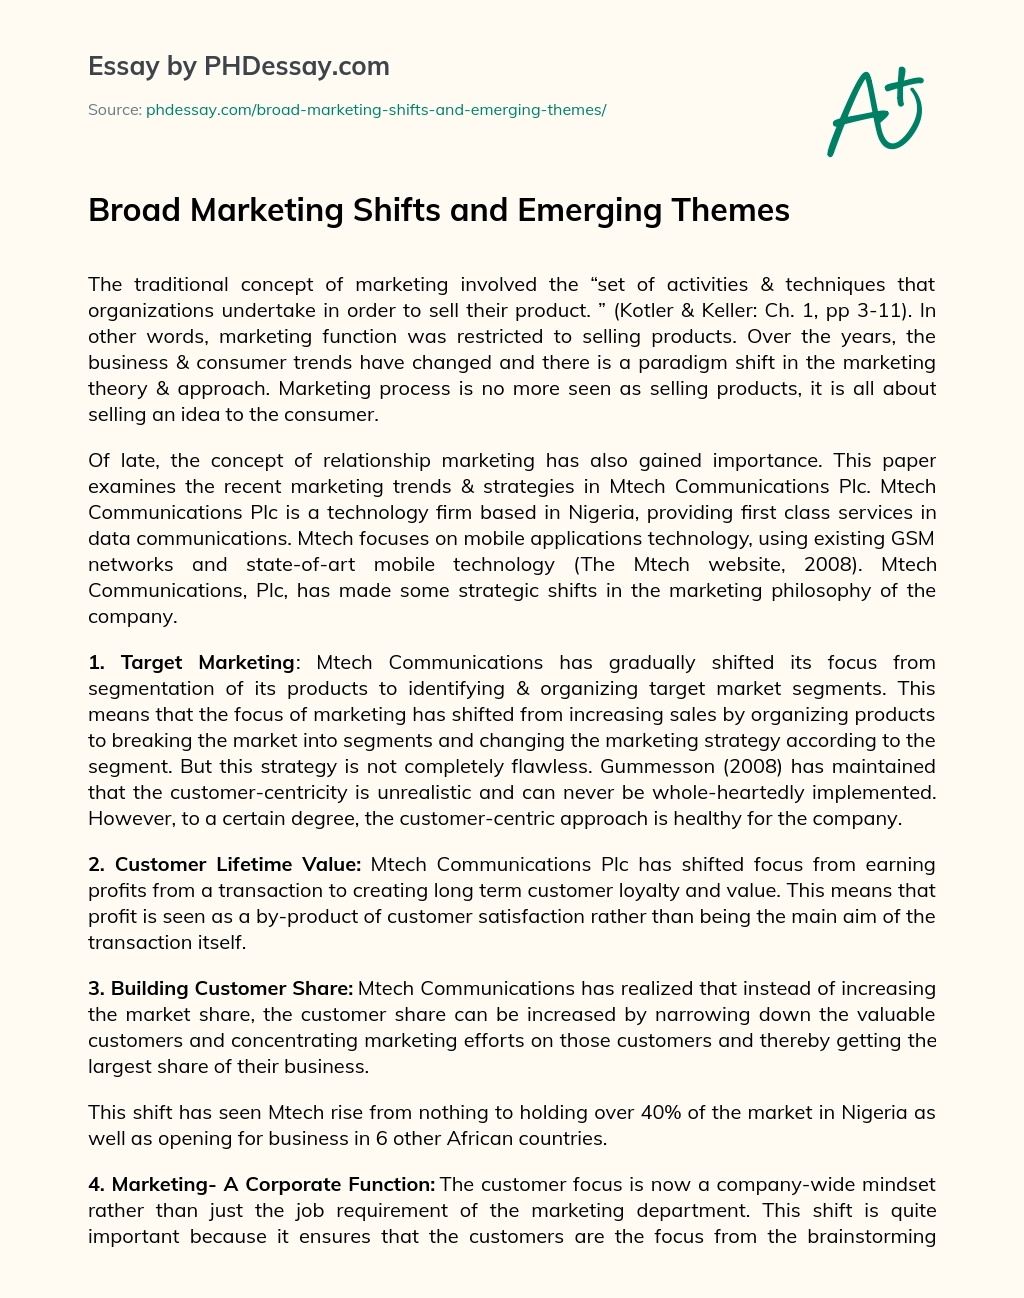 Broad Marketing Shifts and Emerging Themes essay